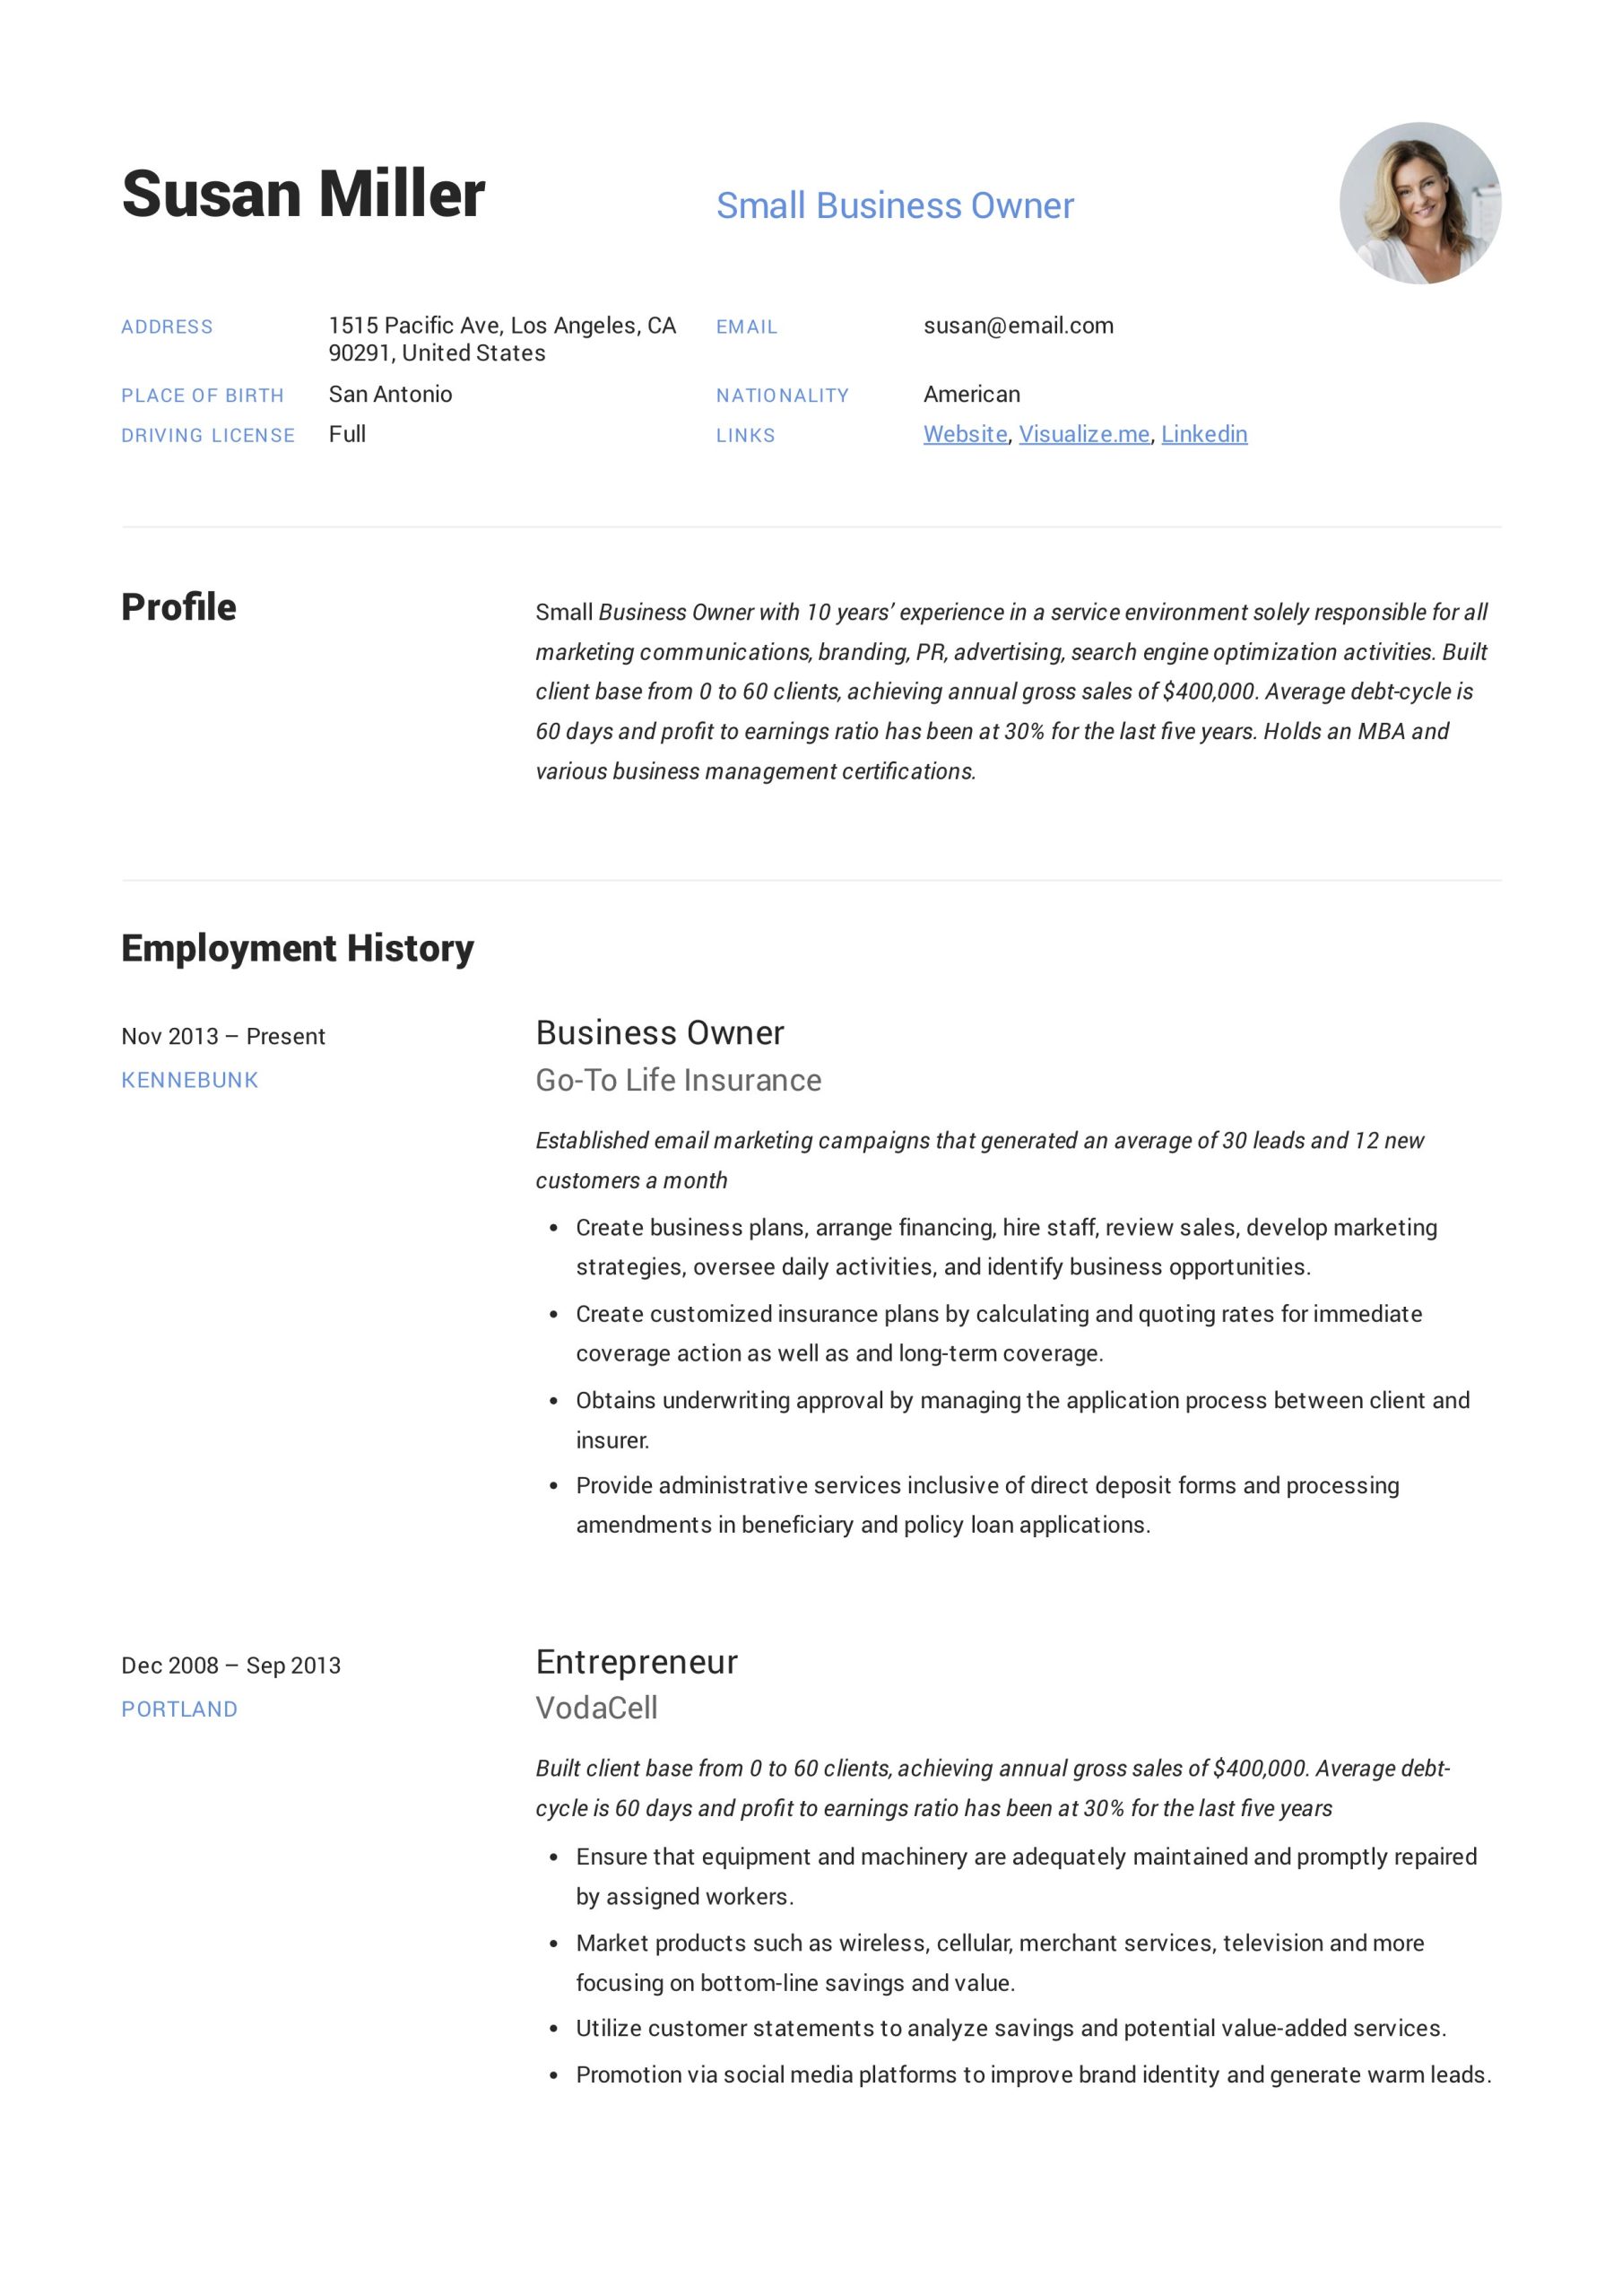 Sample Resume for former Entrepreneurs Business Owners Small Business Owner Resume Guide  19 Examples Pdf 2020